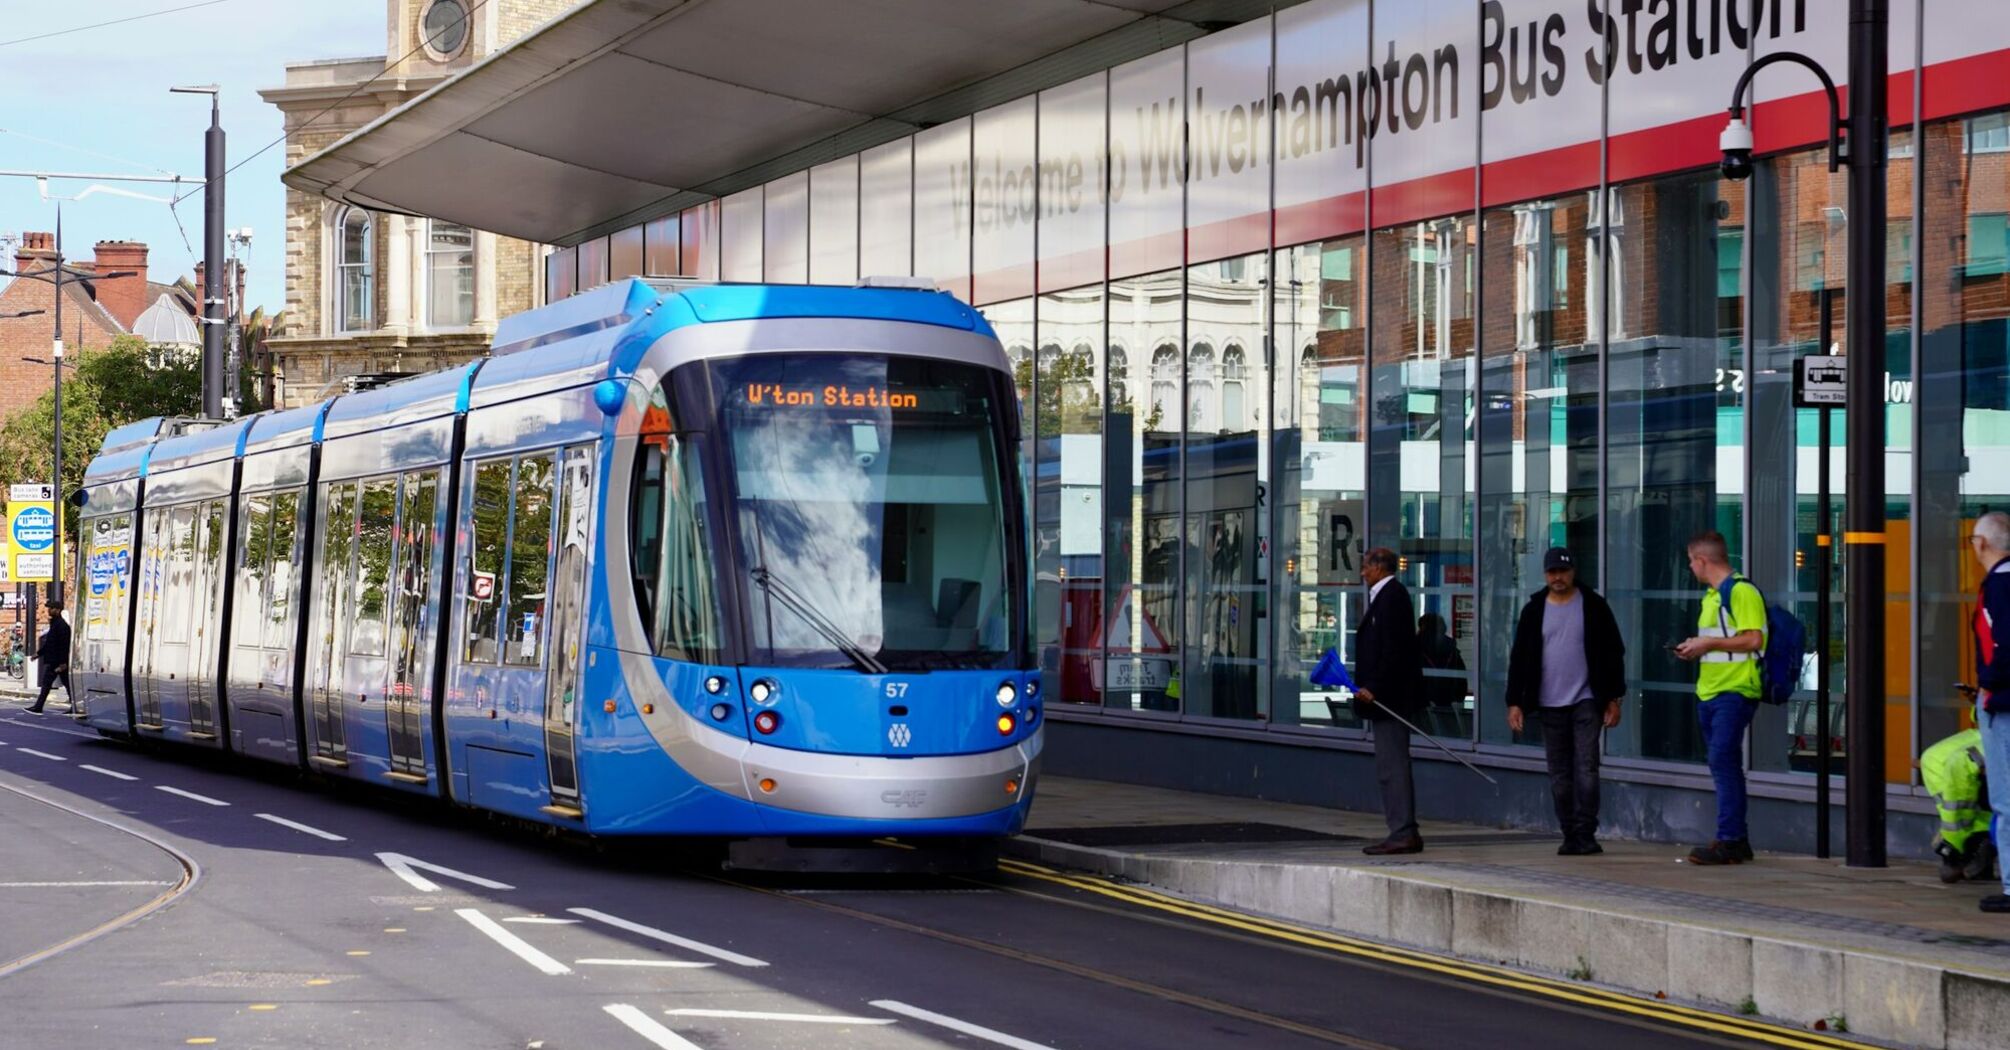 A modern blue tram in front of the Wolverhampton Bus Station, with pedestrians and workers nearby